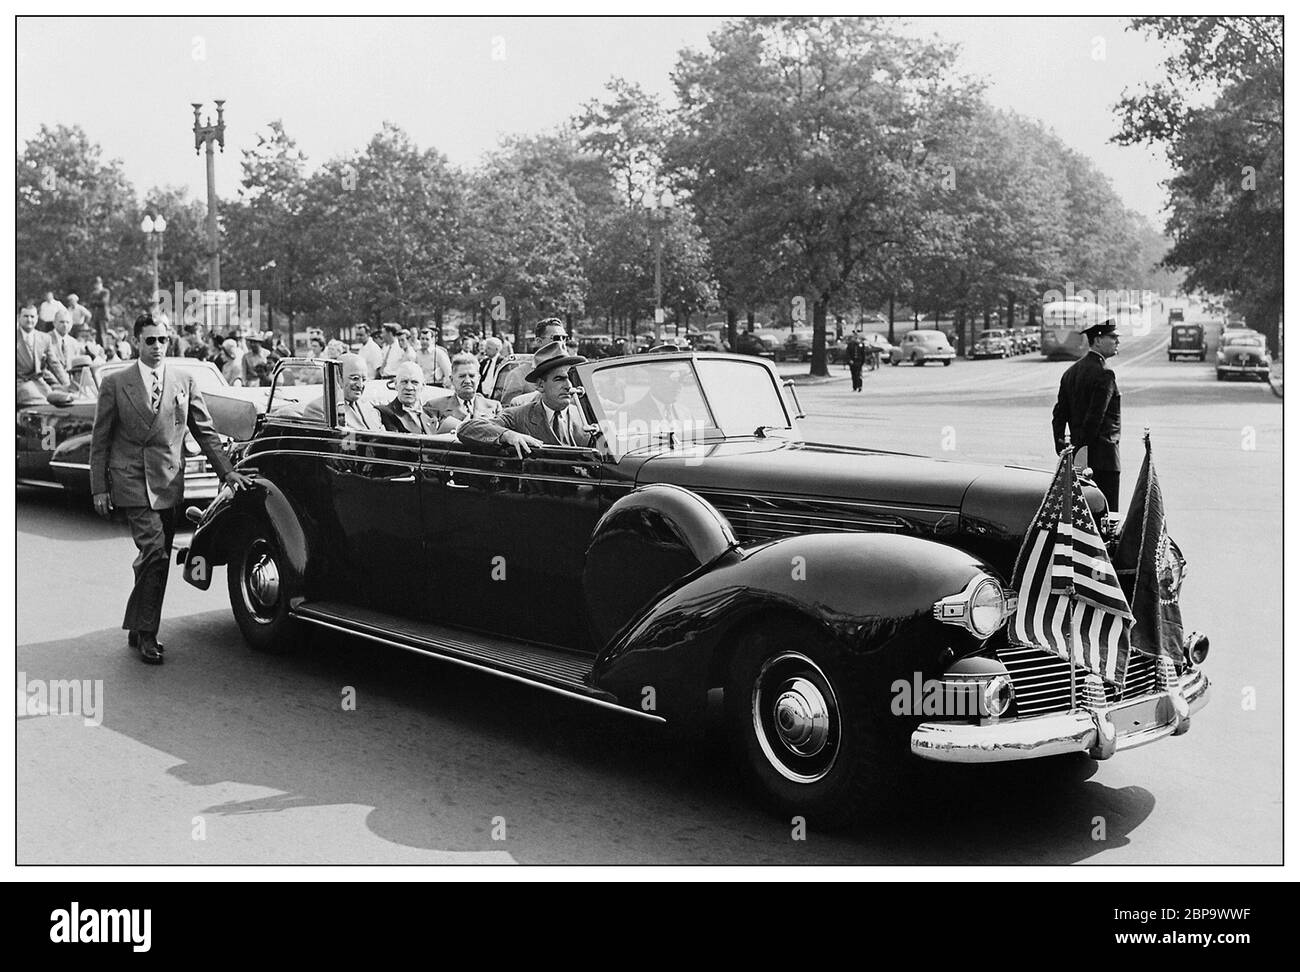 Archive 1939 Lincoln K-series “Sunshine Special” motorcar automobile with President Franklin D. Roosevelt. Up to the FDR administration, the armour plating of presidential cars wasn’t commonplace. However after the attacks on Pearl Harbor, Roosevelt’s K-Series received bulletproof windows and armor plating. Aside from that, the only real modifications included runner-boards for secret service and a few emergency lights and sirens. Stock Photo